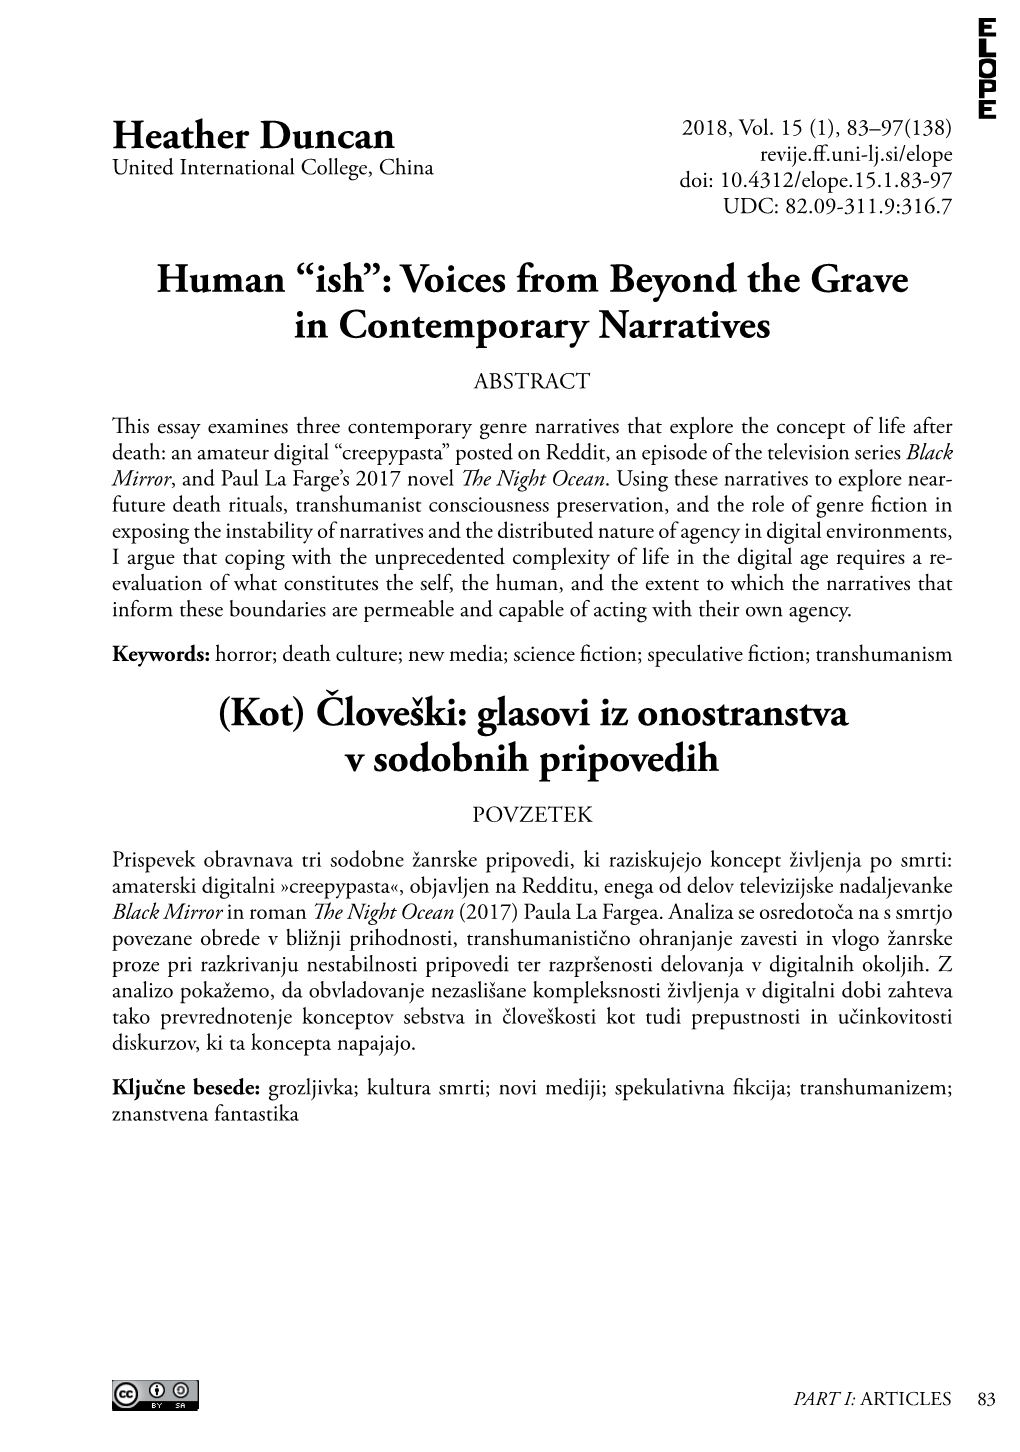 Human “Ish”: Voices from Beyond the Grave in Contemporary Narratives